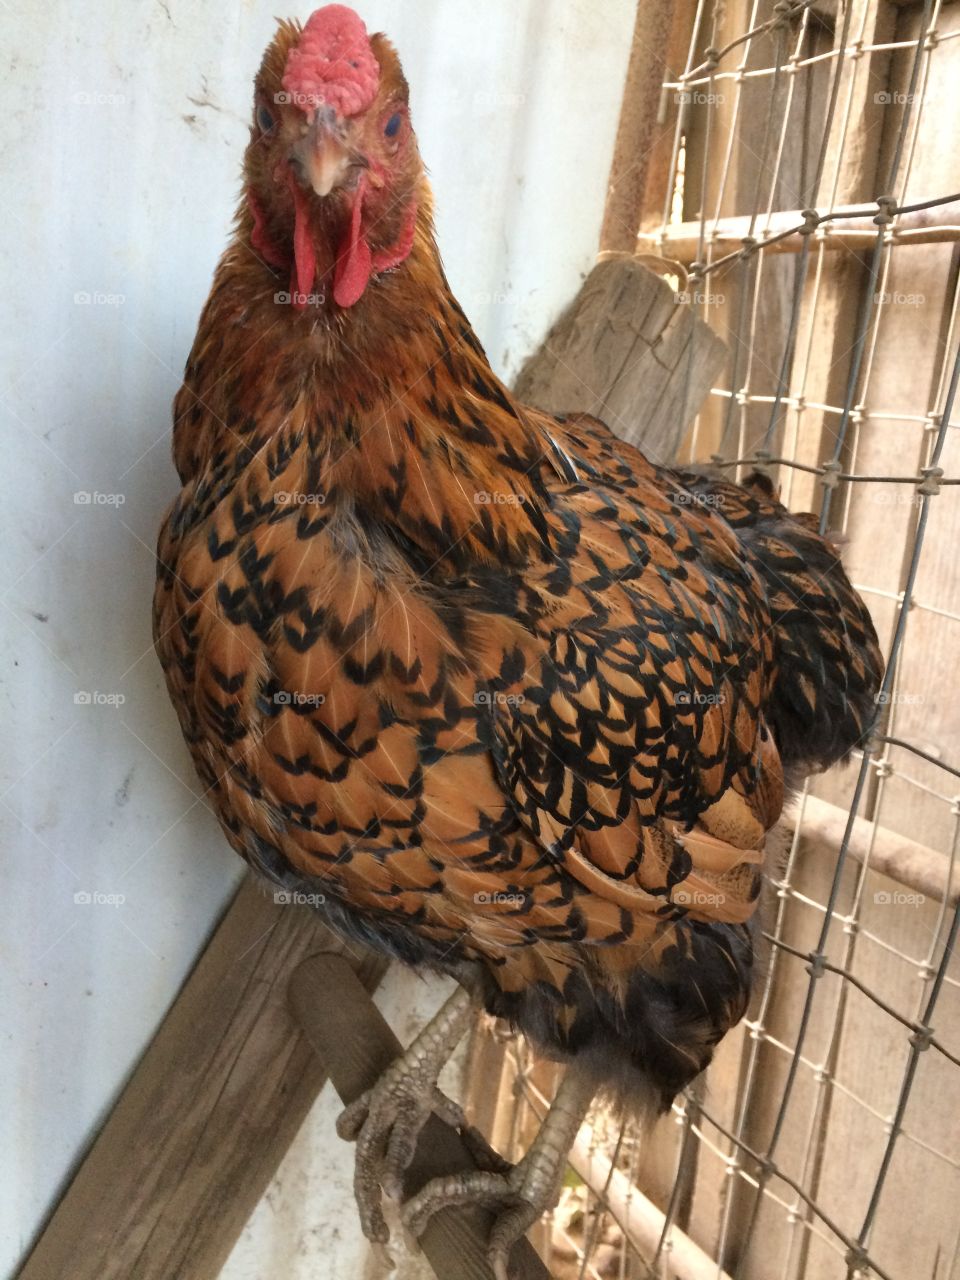 Speckled brown hen on roost